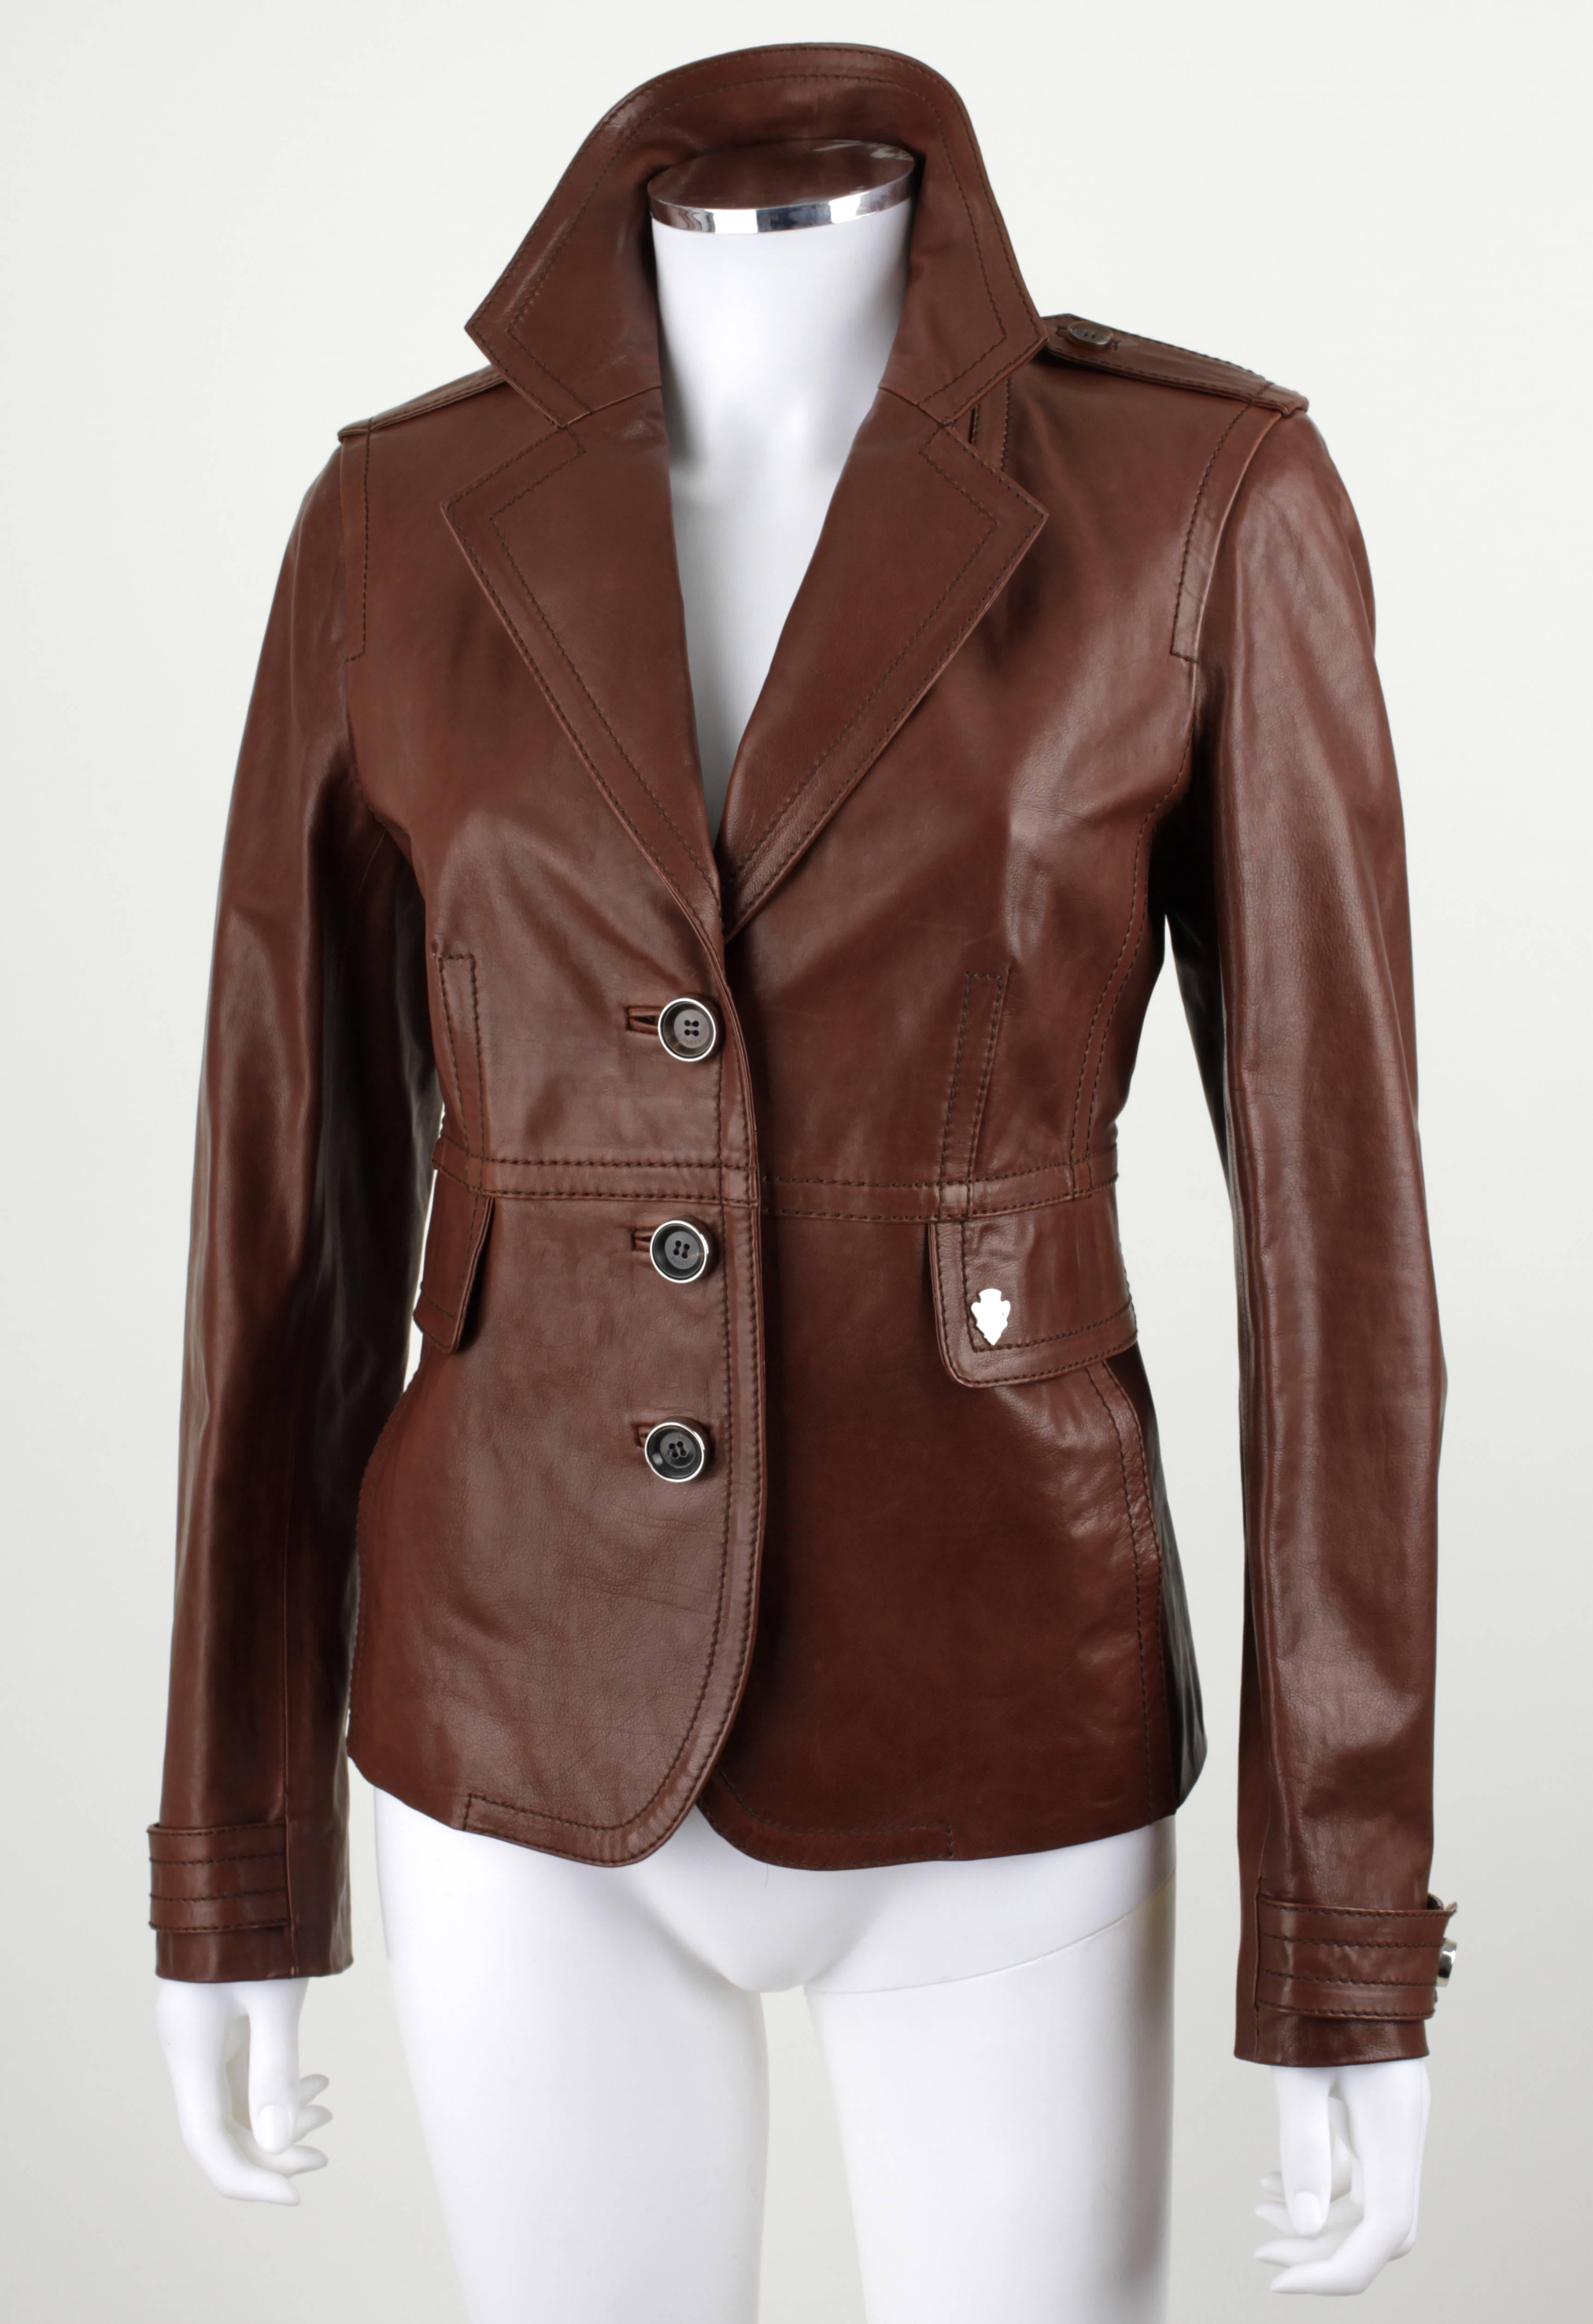 Gucci brown genuine leather jacket. Classic Styling. Button front (3).  Notch lapel. Two faux-pockets. Button detail at cuffs. Silver-tone signature detail. Signature lining.

Measurements & Sizing:

Marked Size: 46 (EU)
Bust: 36 in. (91.44